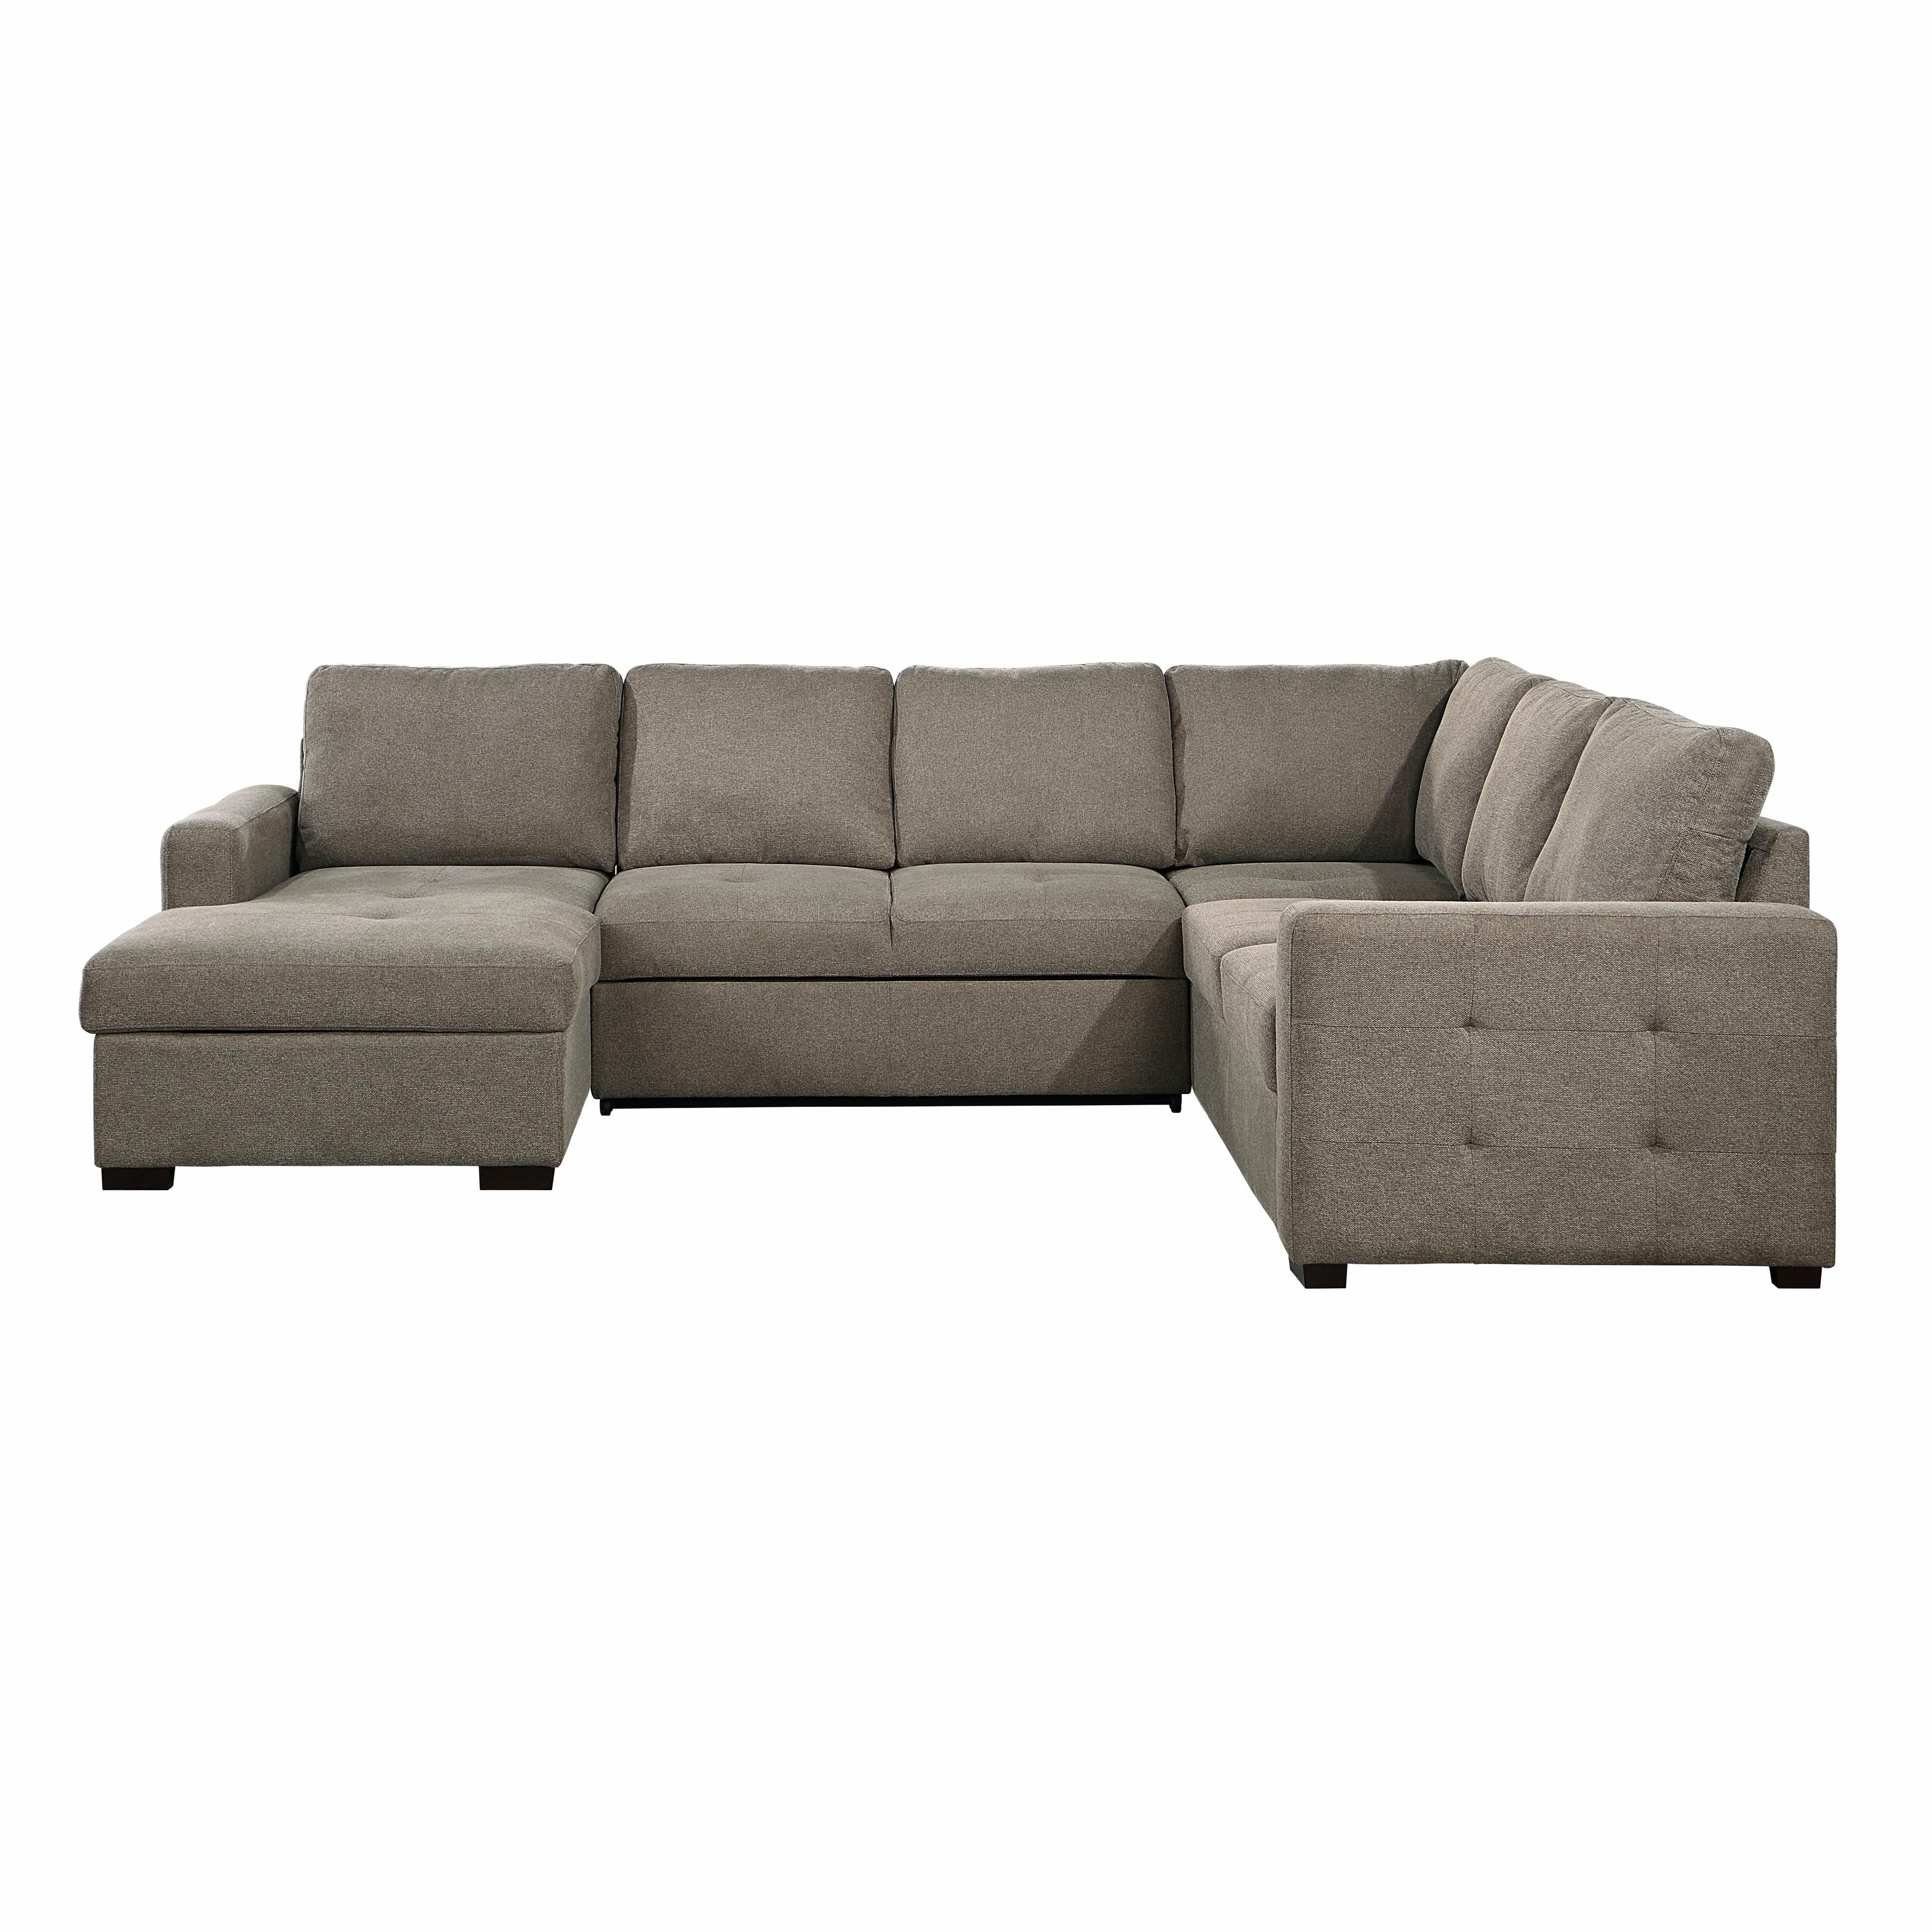 Transitional Sectional 9206BR*3LC3R Elton 9206BR*3LC3R in Brown 